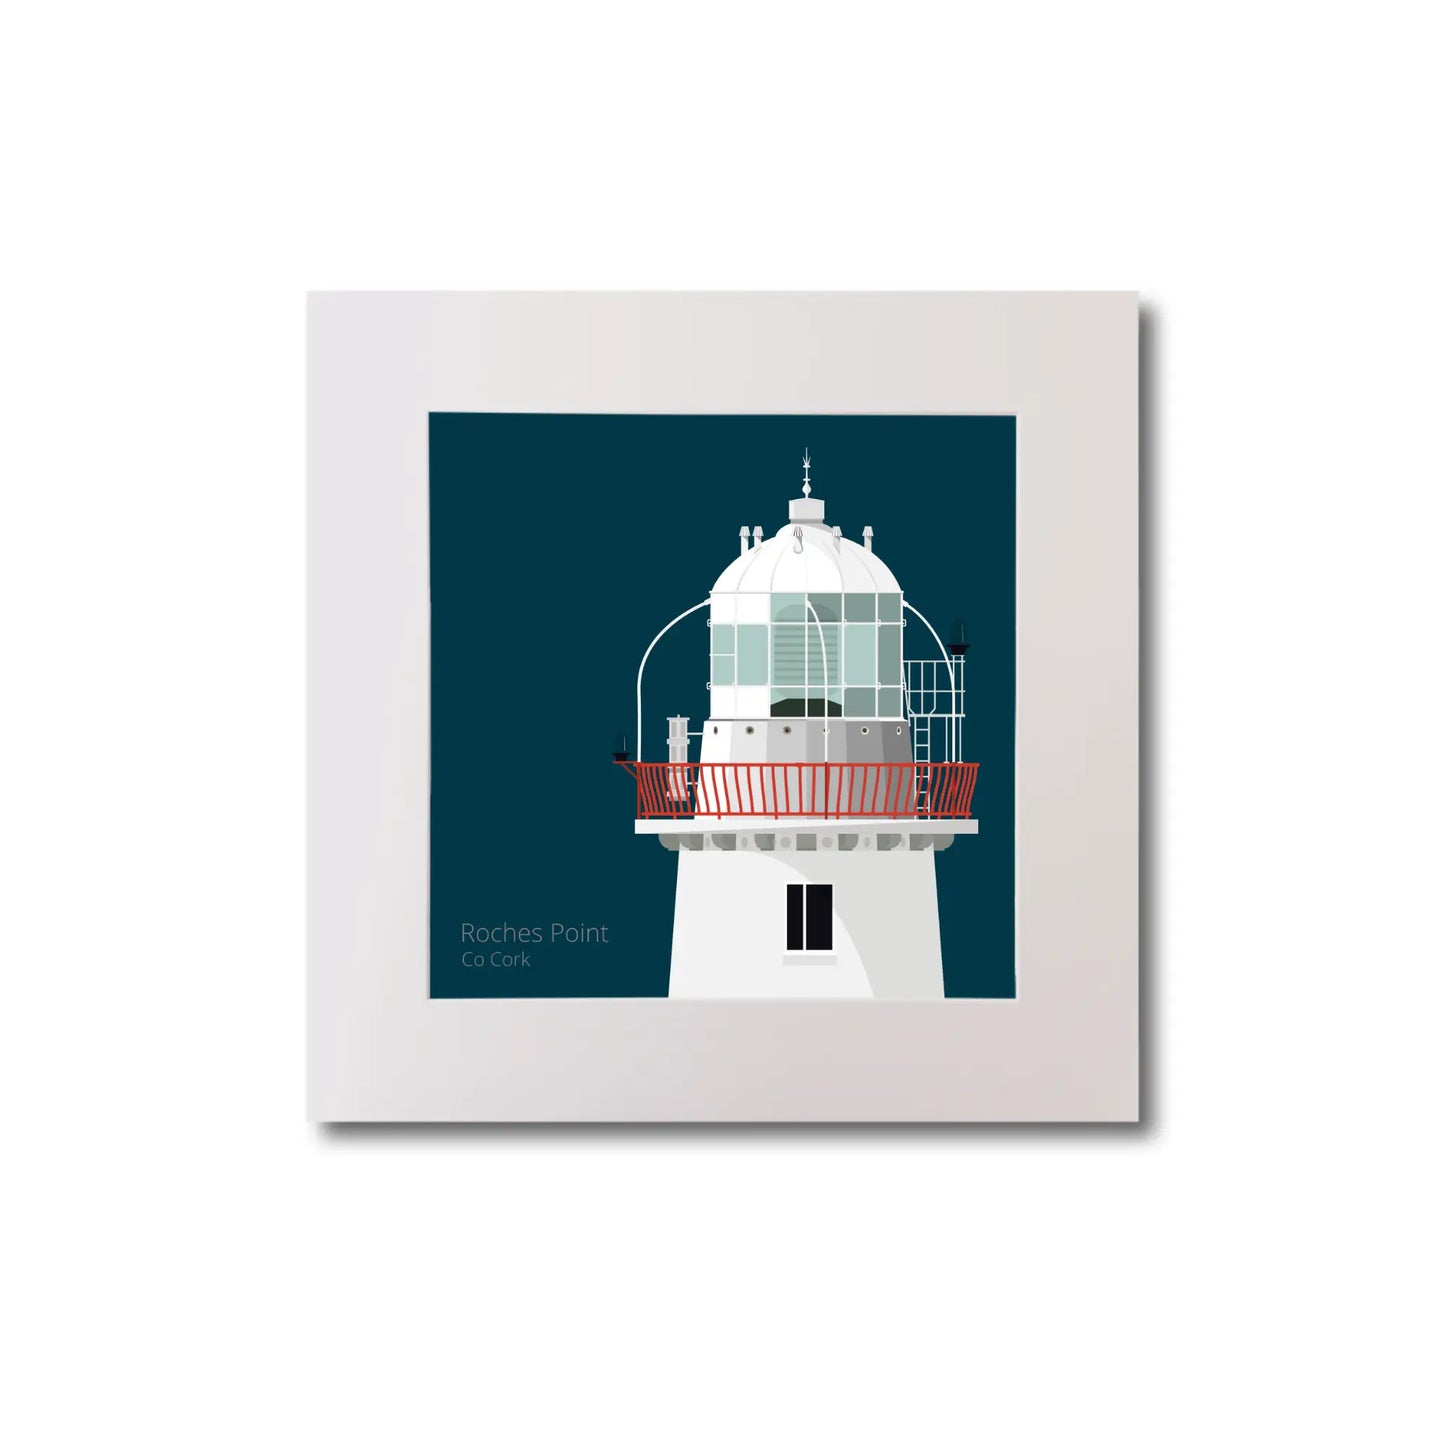 Illustration of Roches Point lighthouse on a midnight blue background, mounted and measuring 20x20cm.